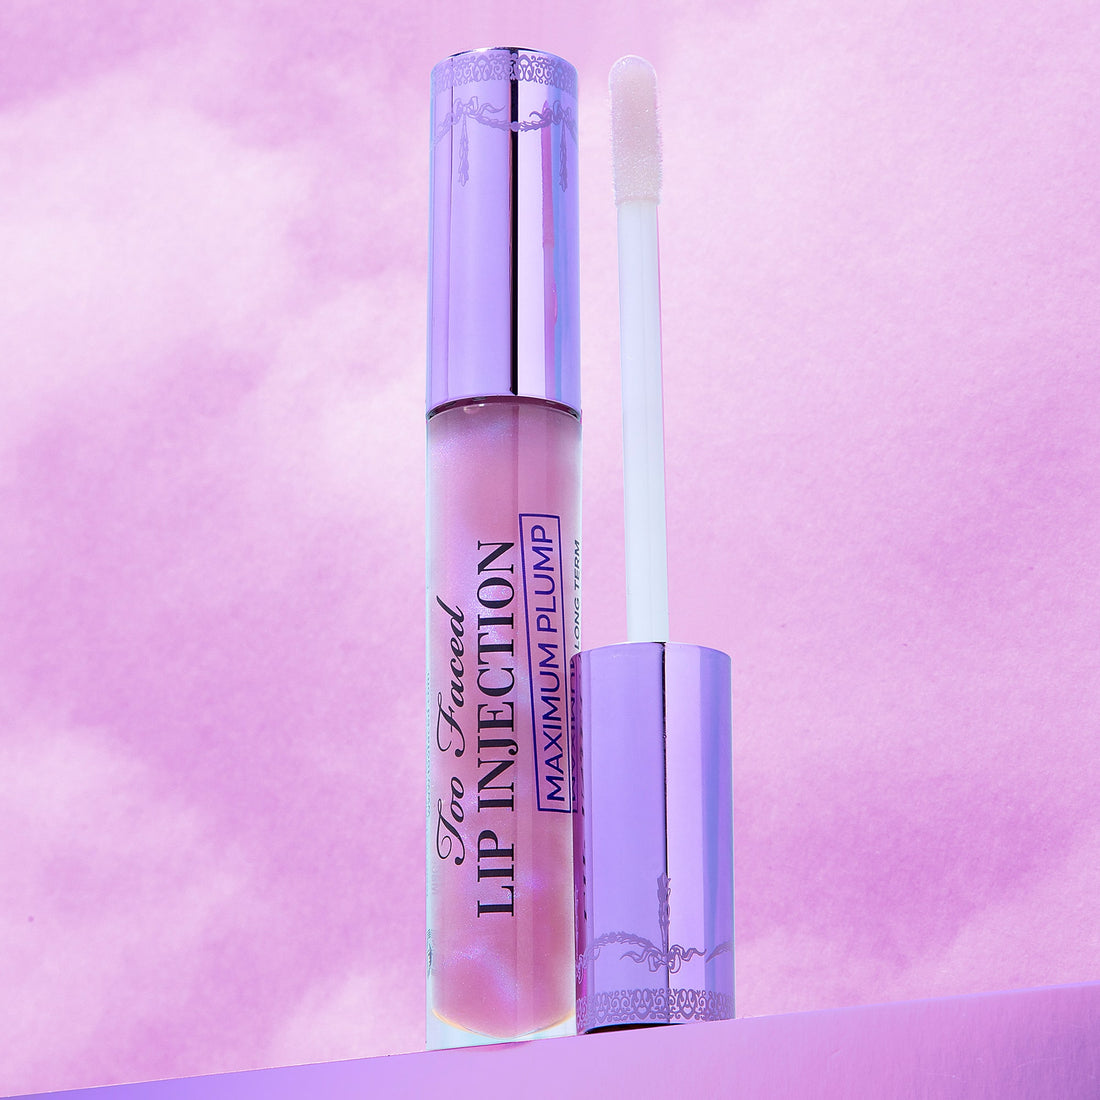 Lip Injection Maximum Plump Extra Strength Lip Plumper Gloss /  Blueberry Buzz - Too Faced.